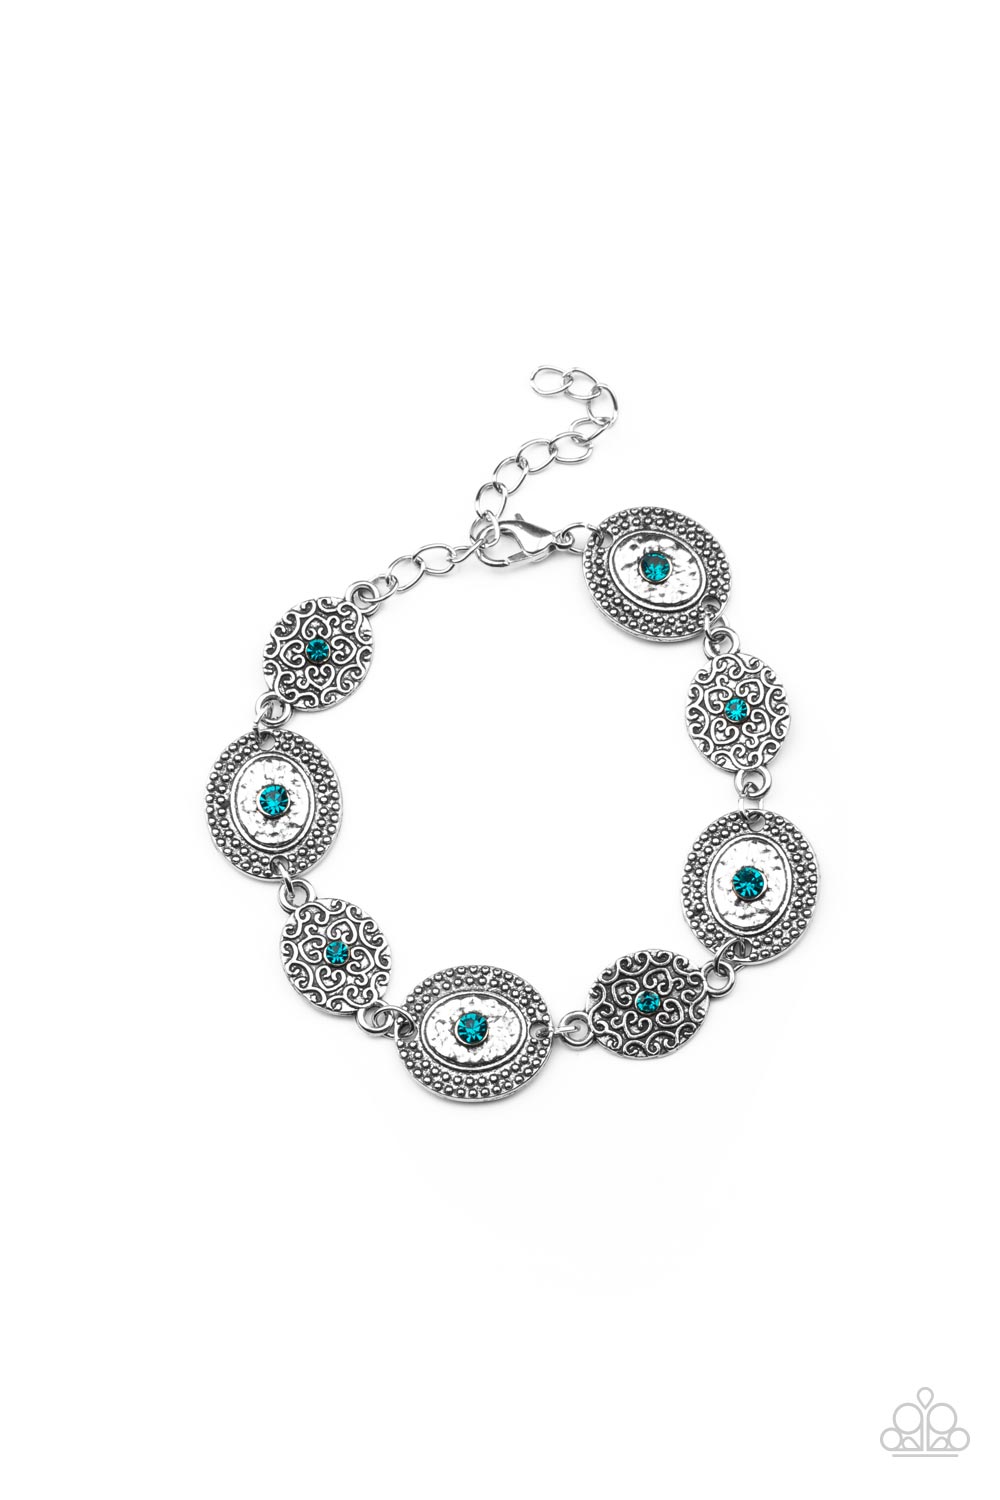 Secret Garden Glamour - Blue Zircon and Silver Bracelet - Paparazzi Accessories - Delicate Blue Zircon rhinestones dot the centers of engraved antiqued silver discs. The dotted textures and heart-shaped vines create a charming impression as they gracefully link around the wrist. Features an adjustable clasp closure.  Bejeweled Accessories By Kristie - Trendy fashion jewelry for everyone -